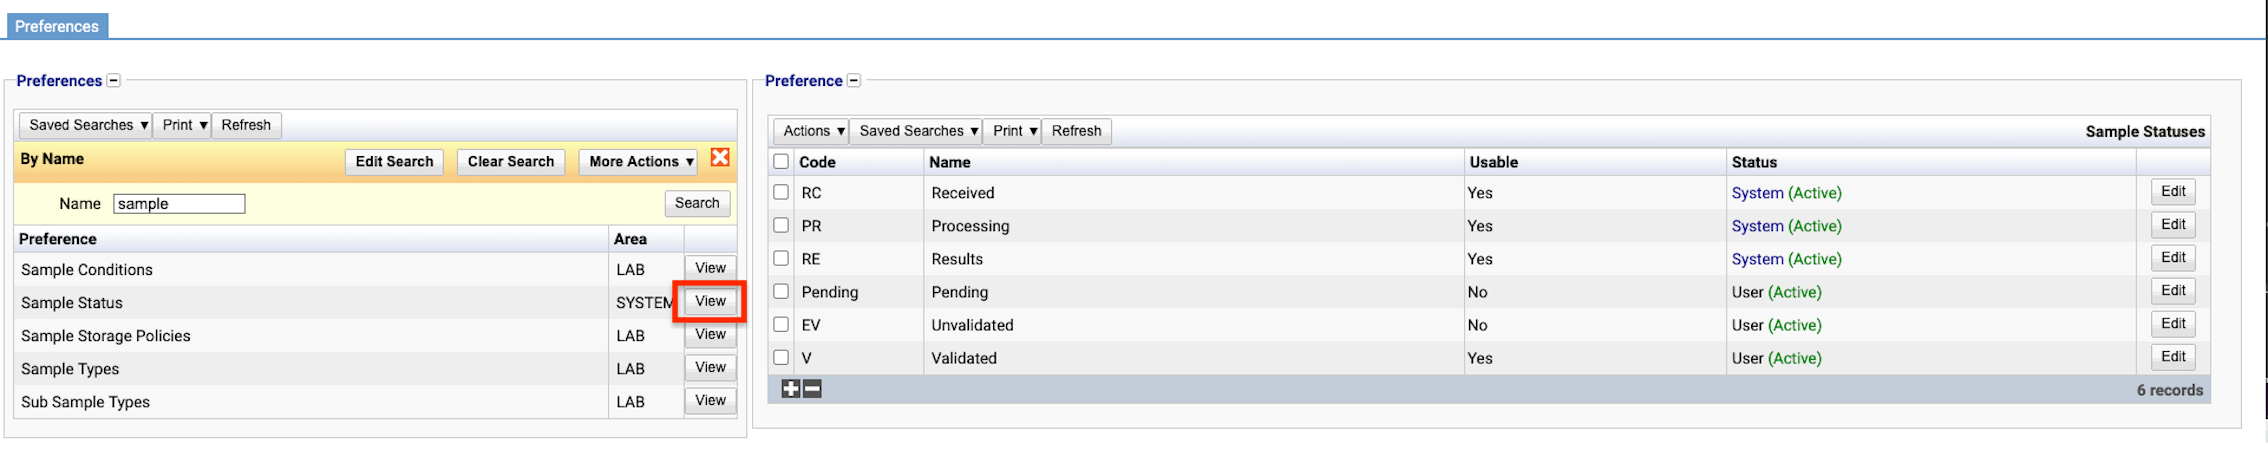 Status for output samples field found in test preference